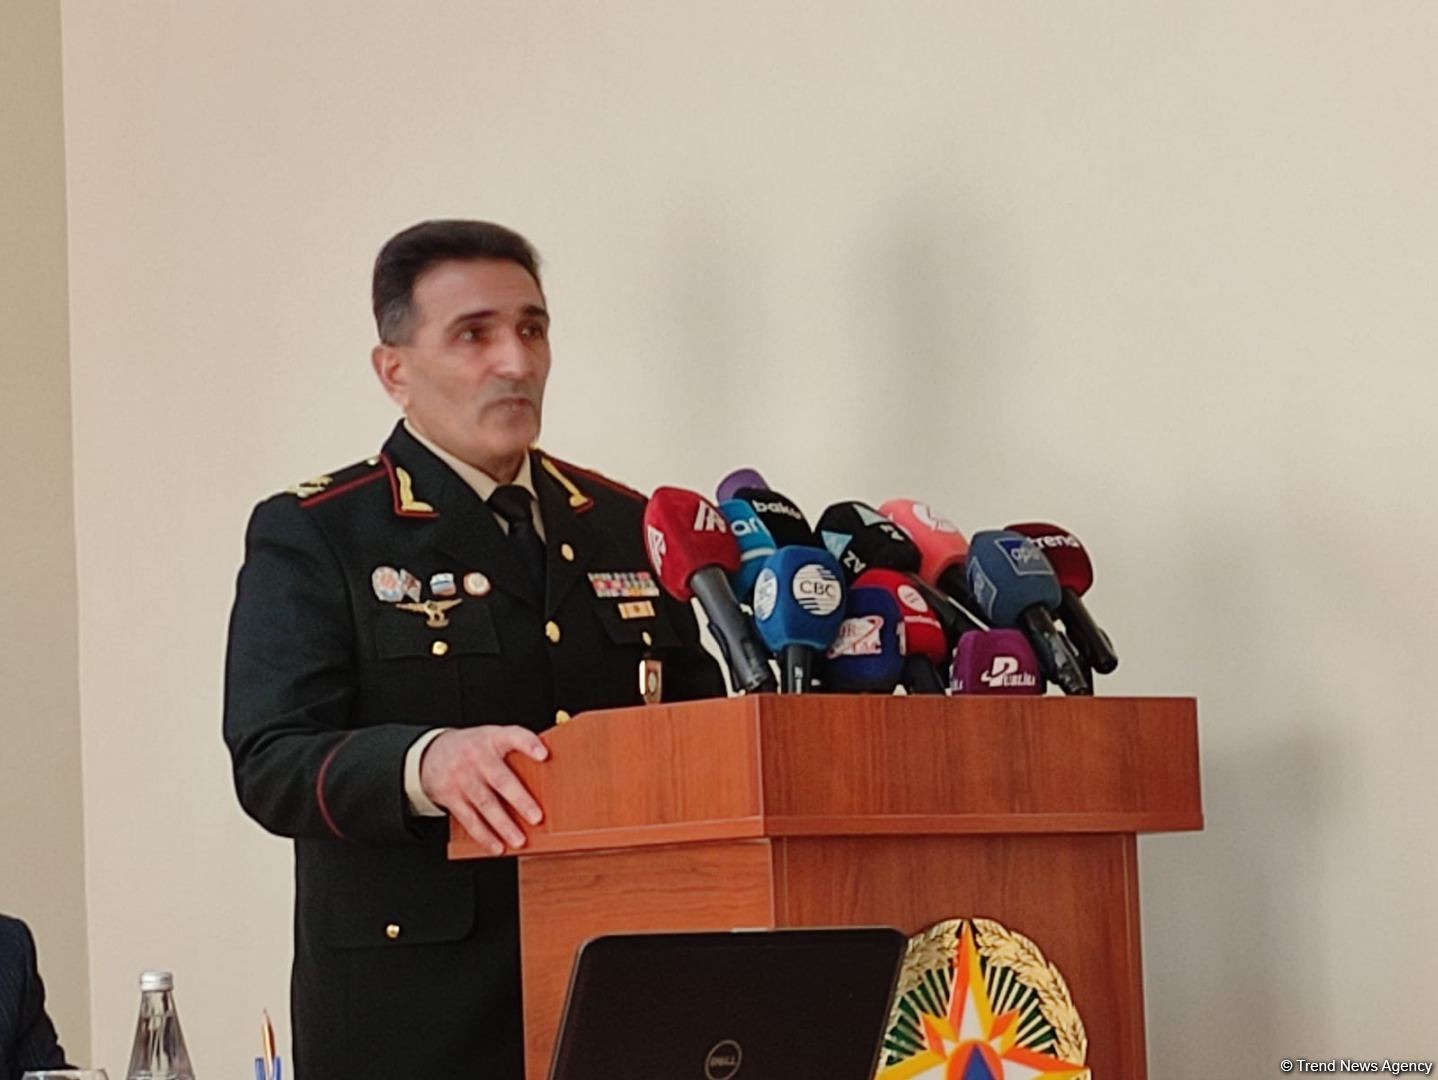 Demining of Azerbaijan's liberated areas - main issue now - ministry